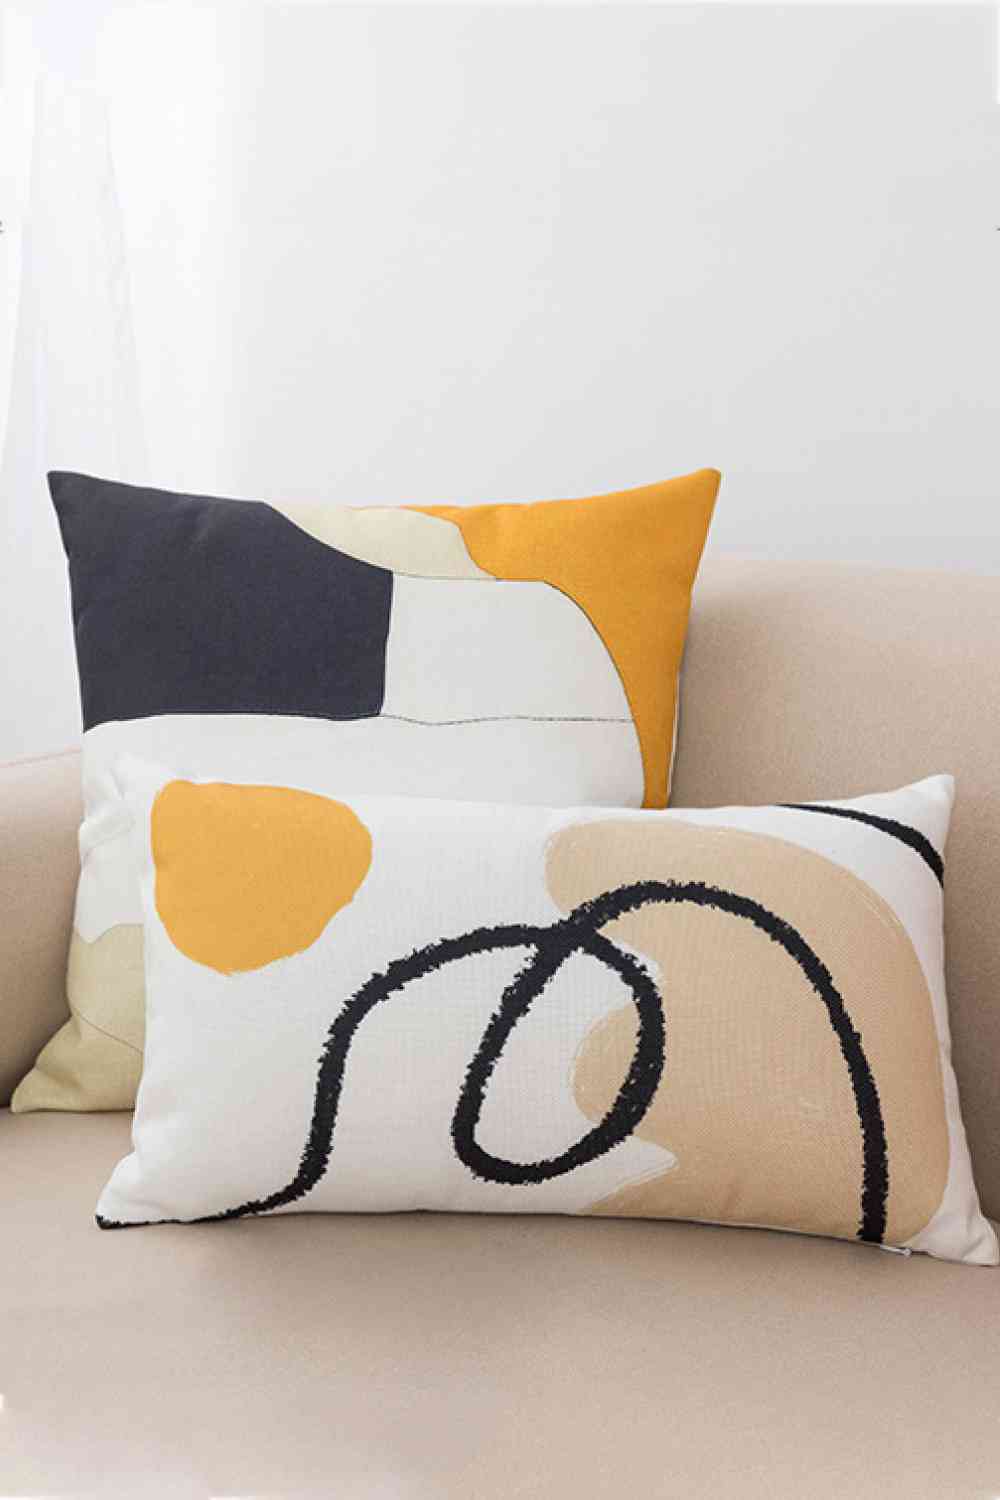 2-Pack Decorative Throw Pillow Cases - Decorative Pillowcases - Tophatter's Smashing Daily Deals | We're Against Forced Labor in China